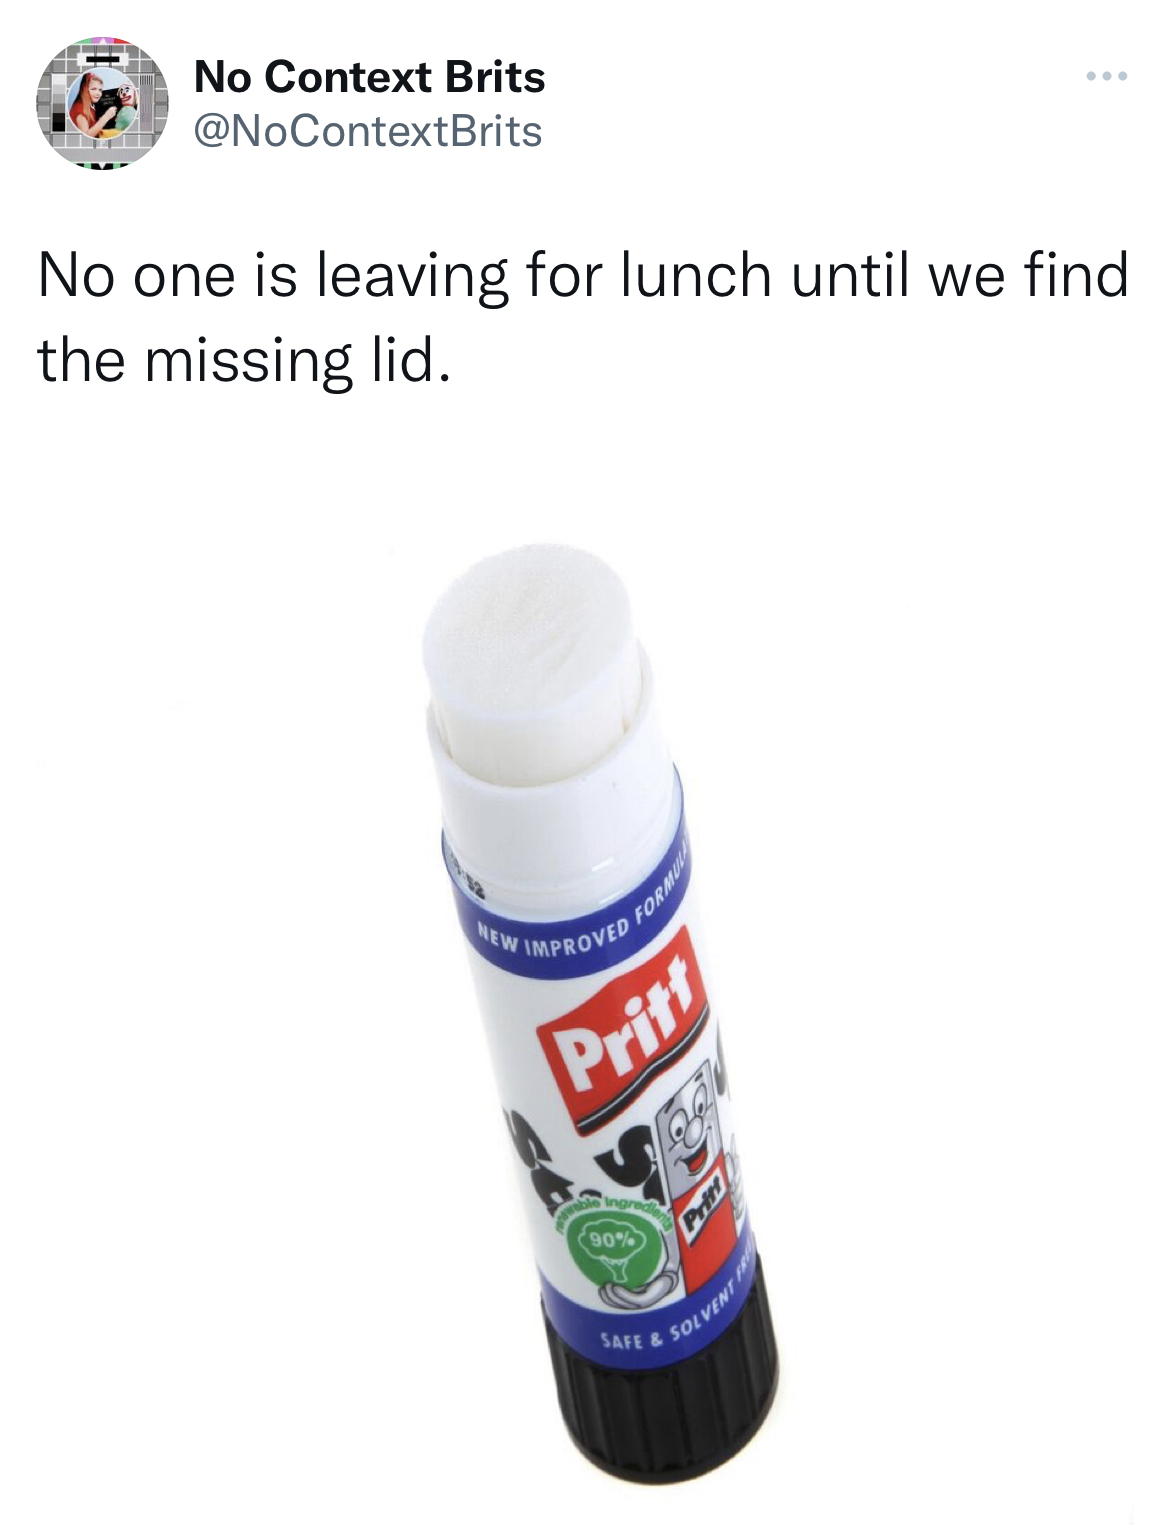 Untamed Tweets - liquid - No Context Brits No one is leaving for lunch until we find the missing lid. New Formu Improved Pritt 90% Prift Safe & Nt Fre Solvent